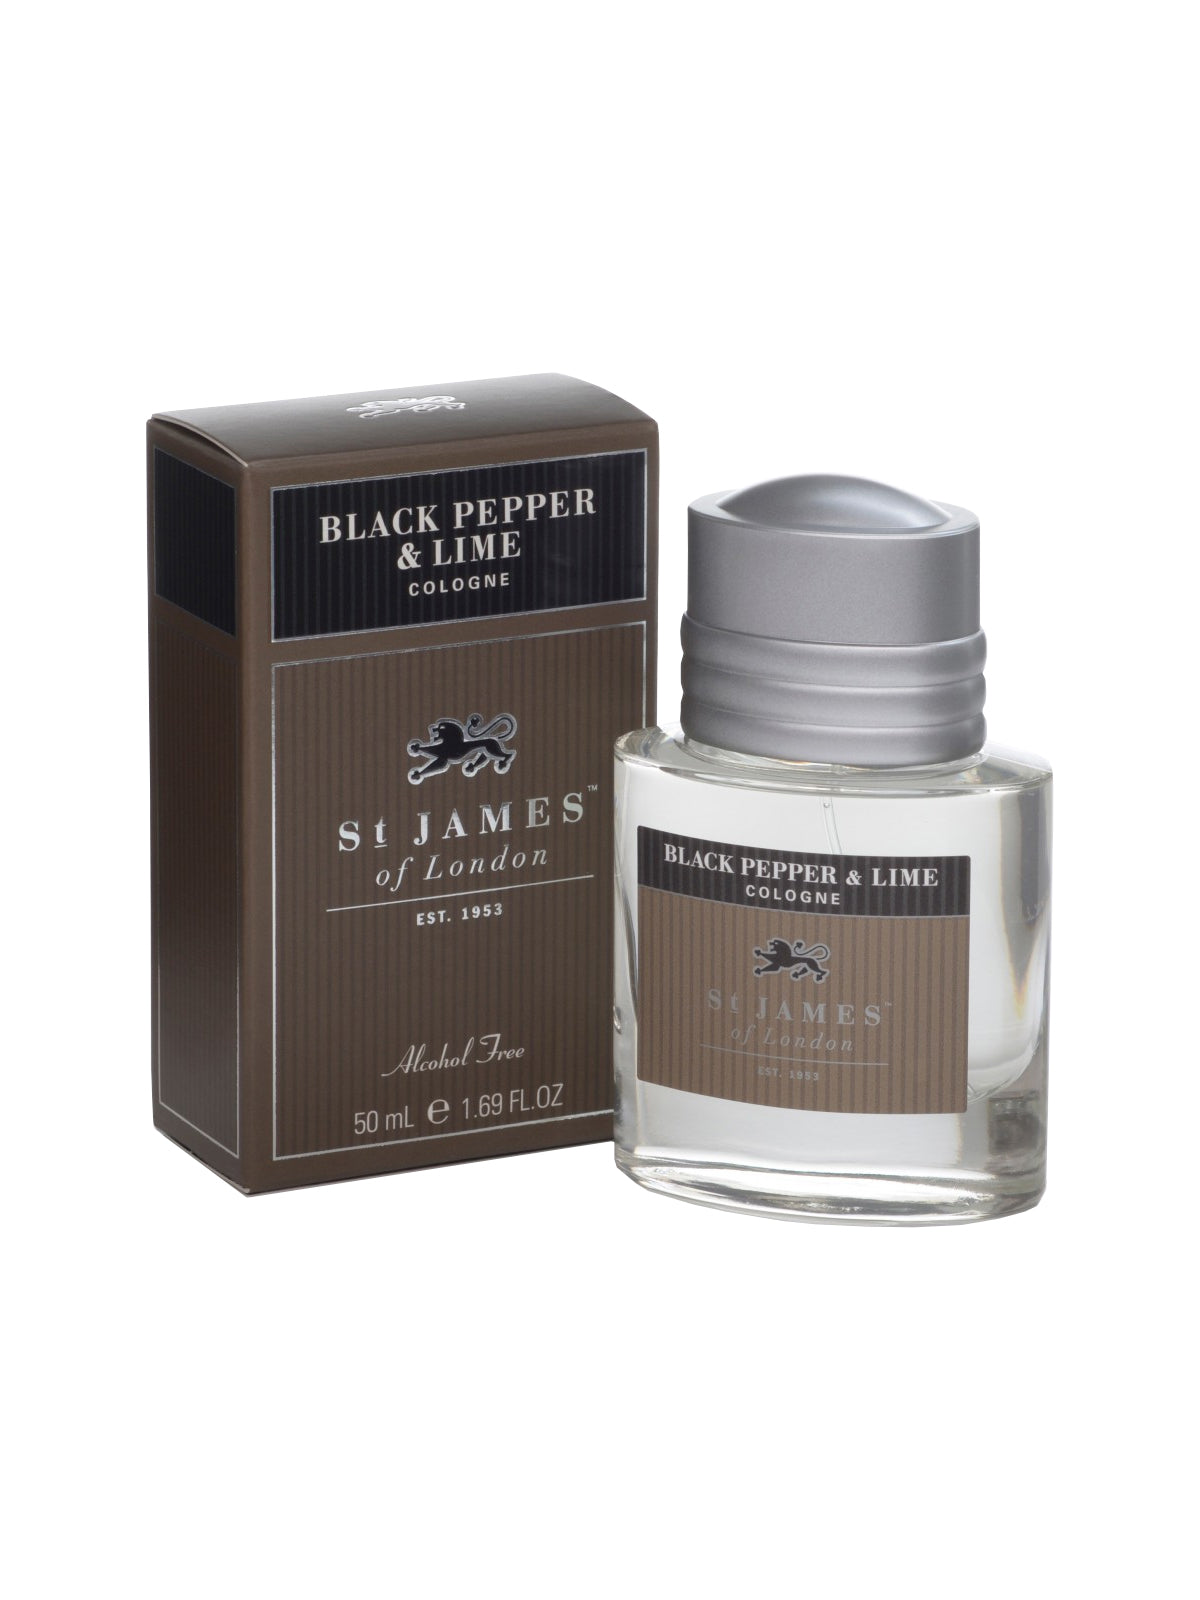 St James of London Black Pepper and Lime Cologne